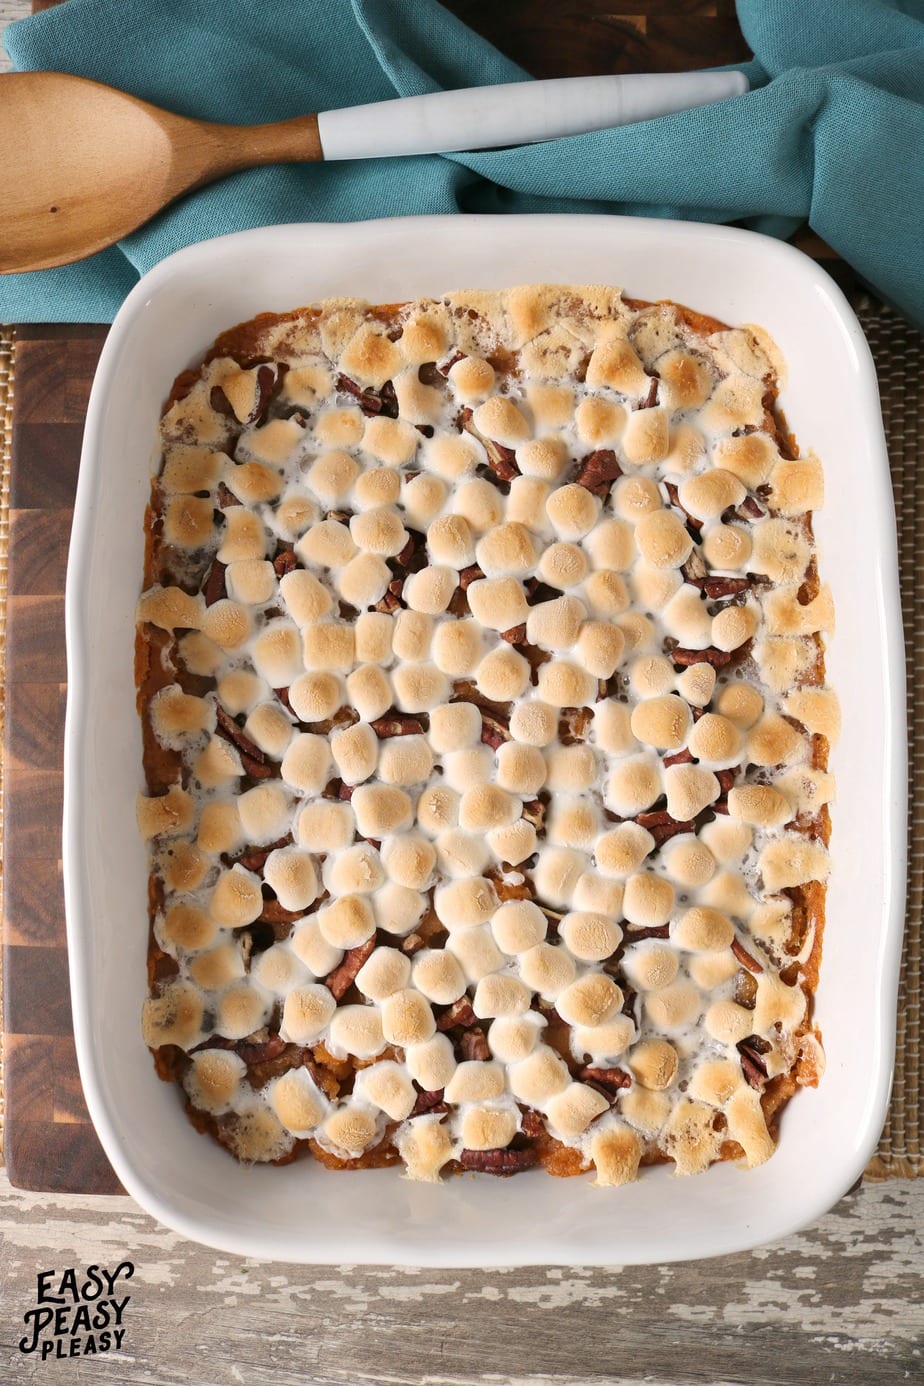 ry this simple yet exquisite Sweet Potato Casserole this holiday season. This is the dish to round out your Thanksgiving and Christmas menus.